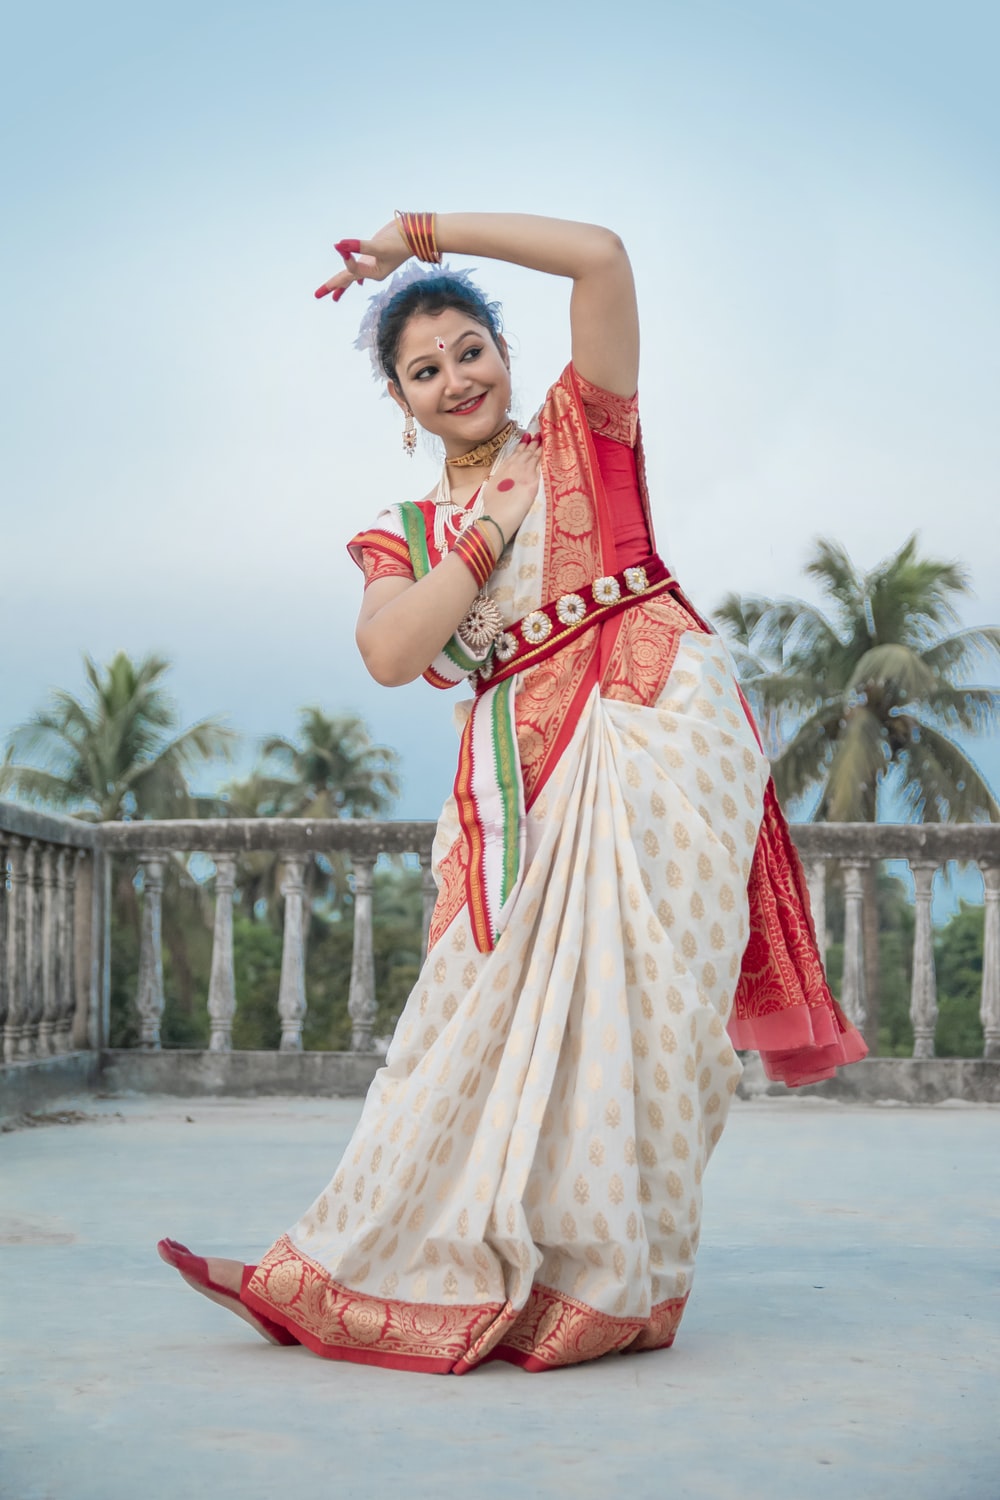 Indian Dance Picture [HD]. Download Free Image